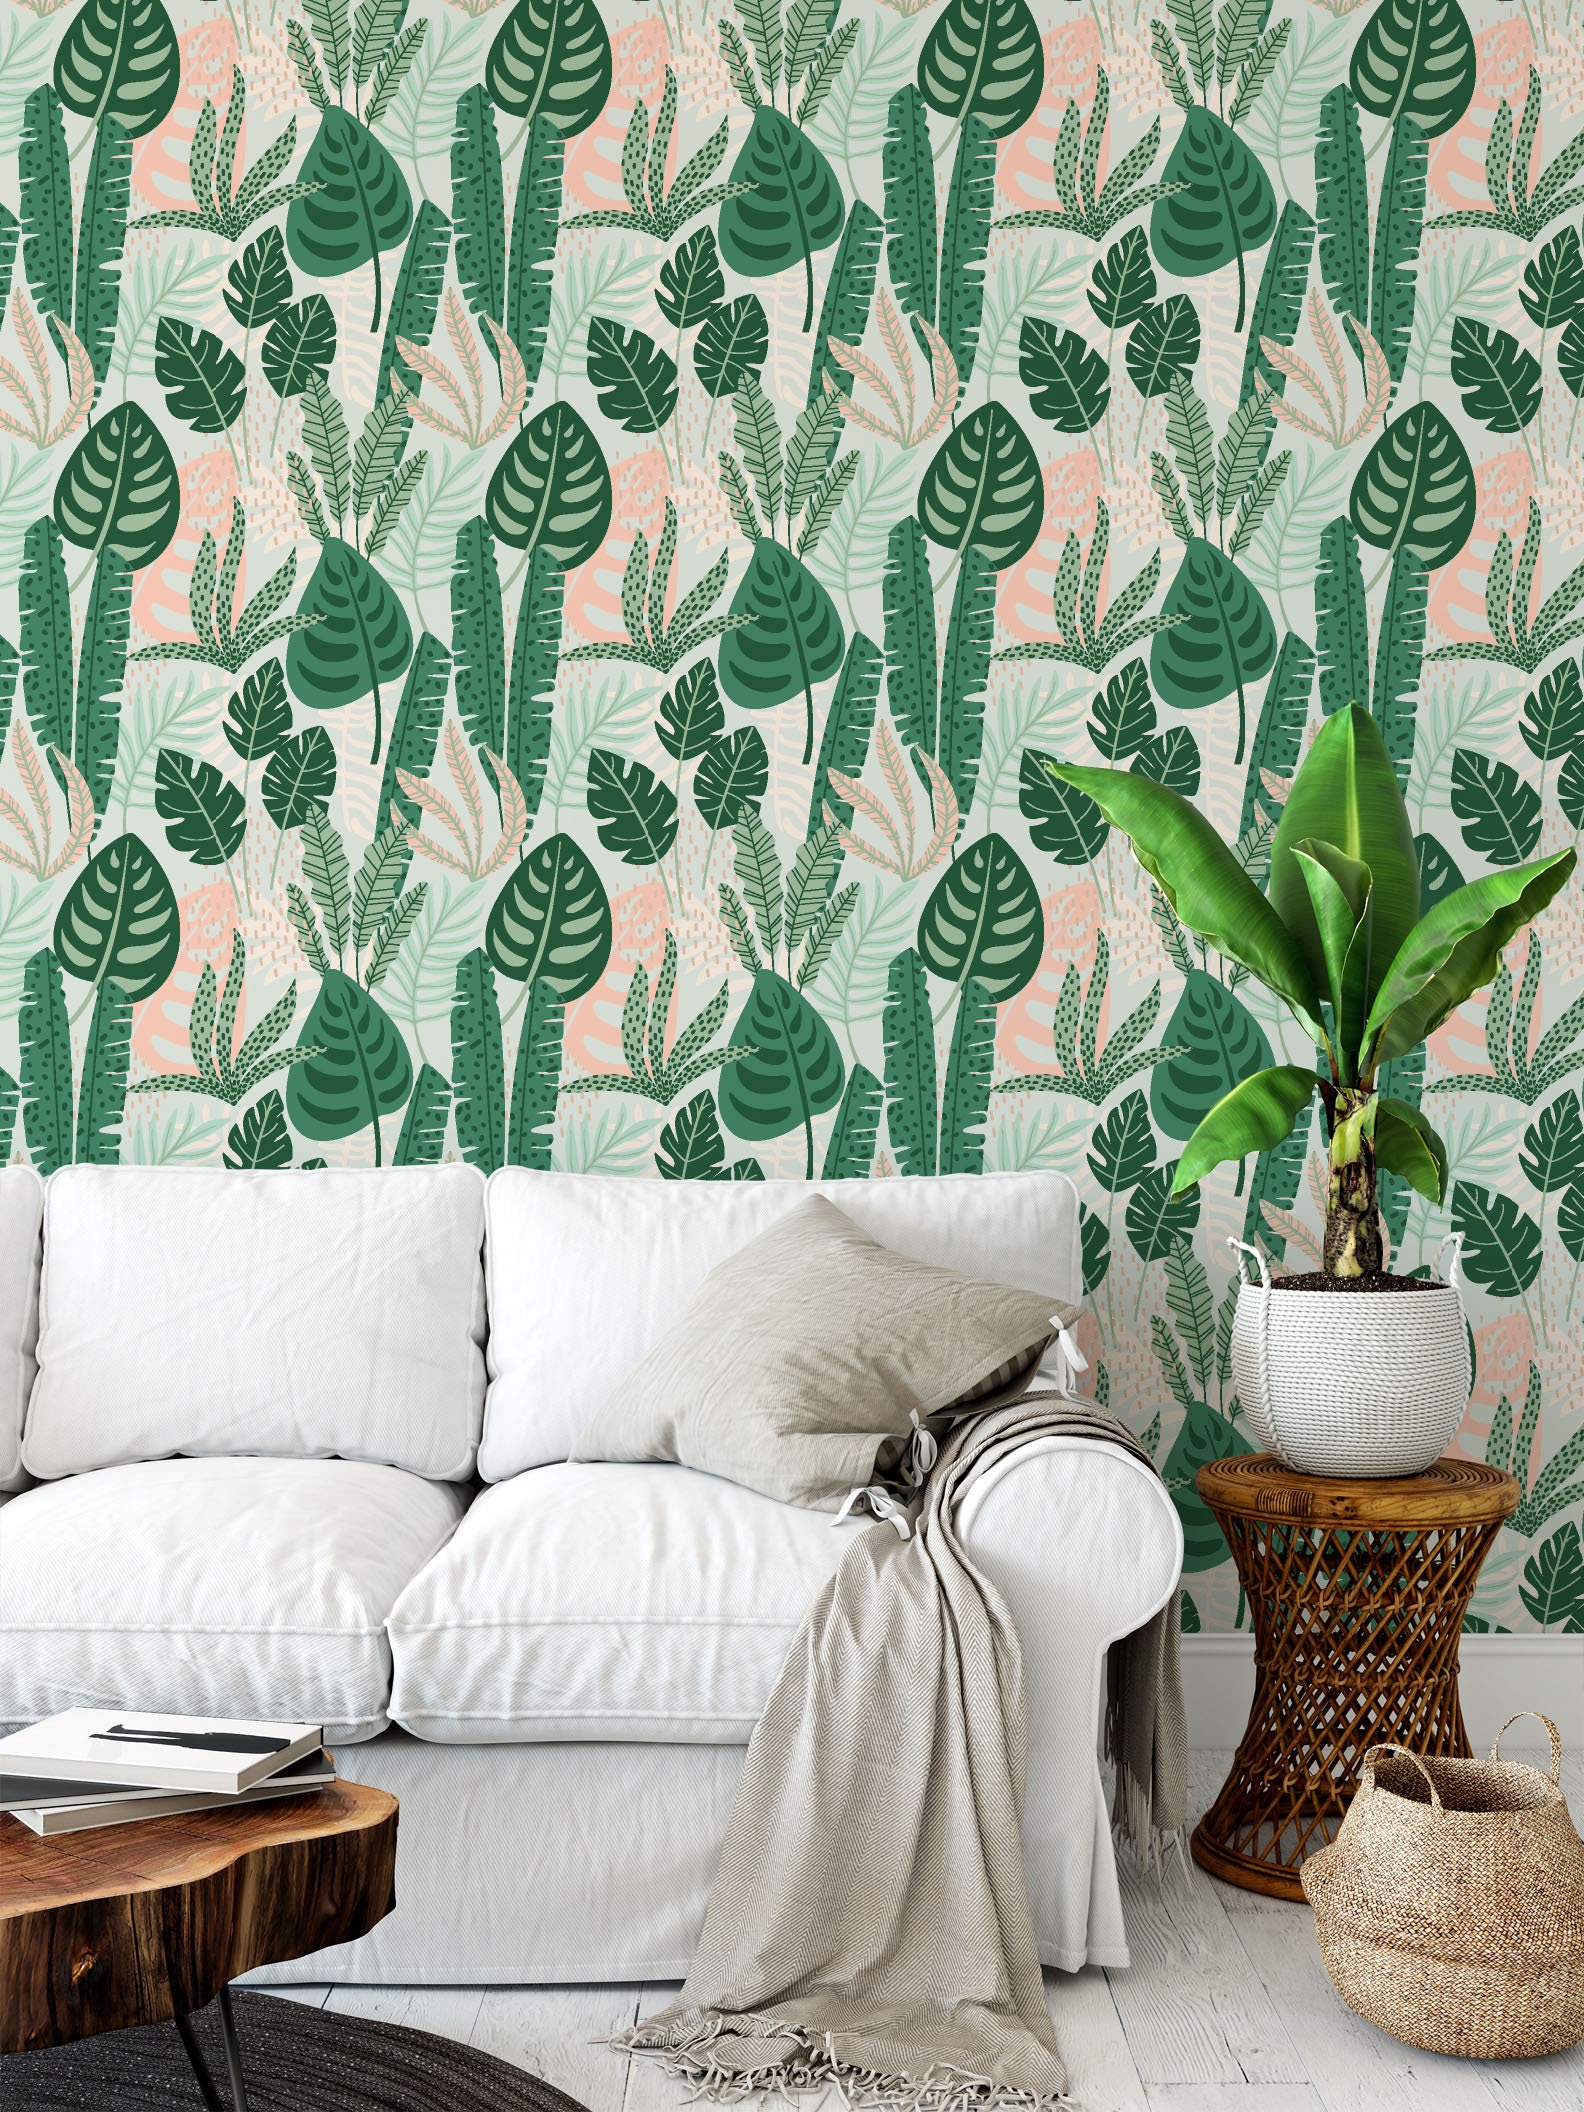 Tropical Removable Wallpaper. Palm leaves. Monstera Leaf. Peel | Etsy